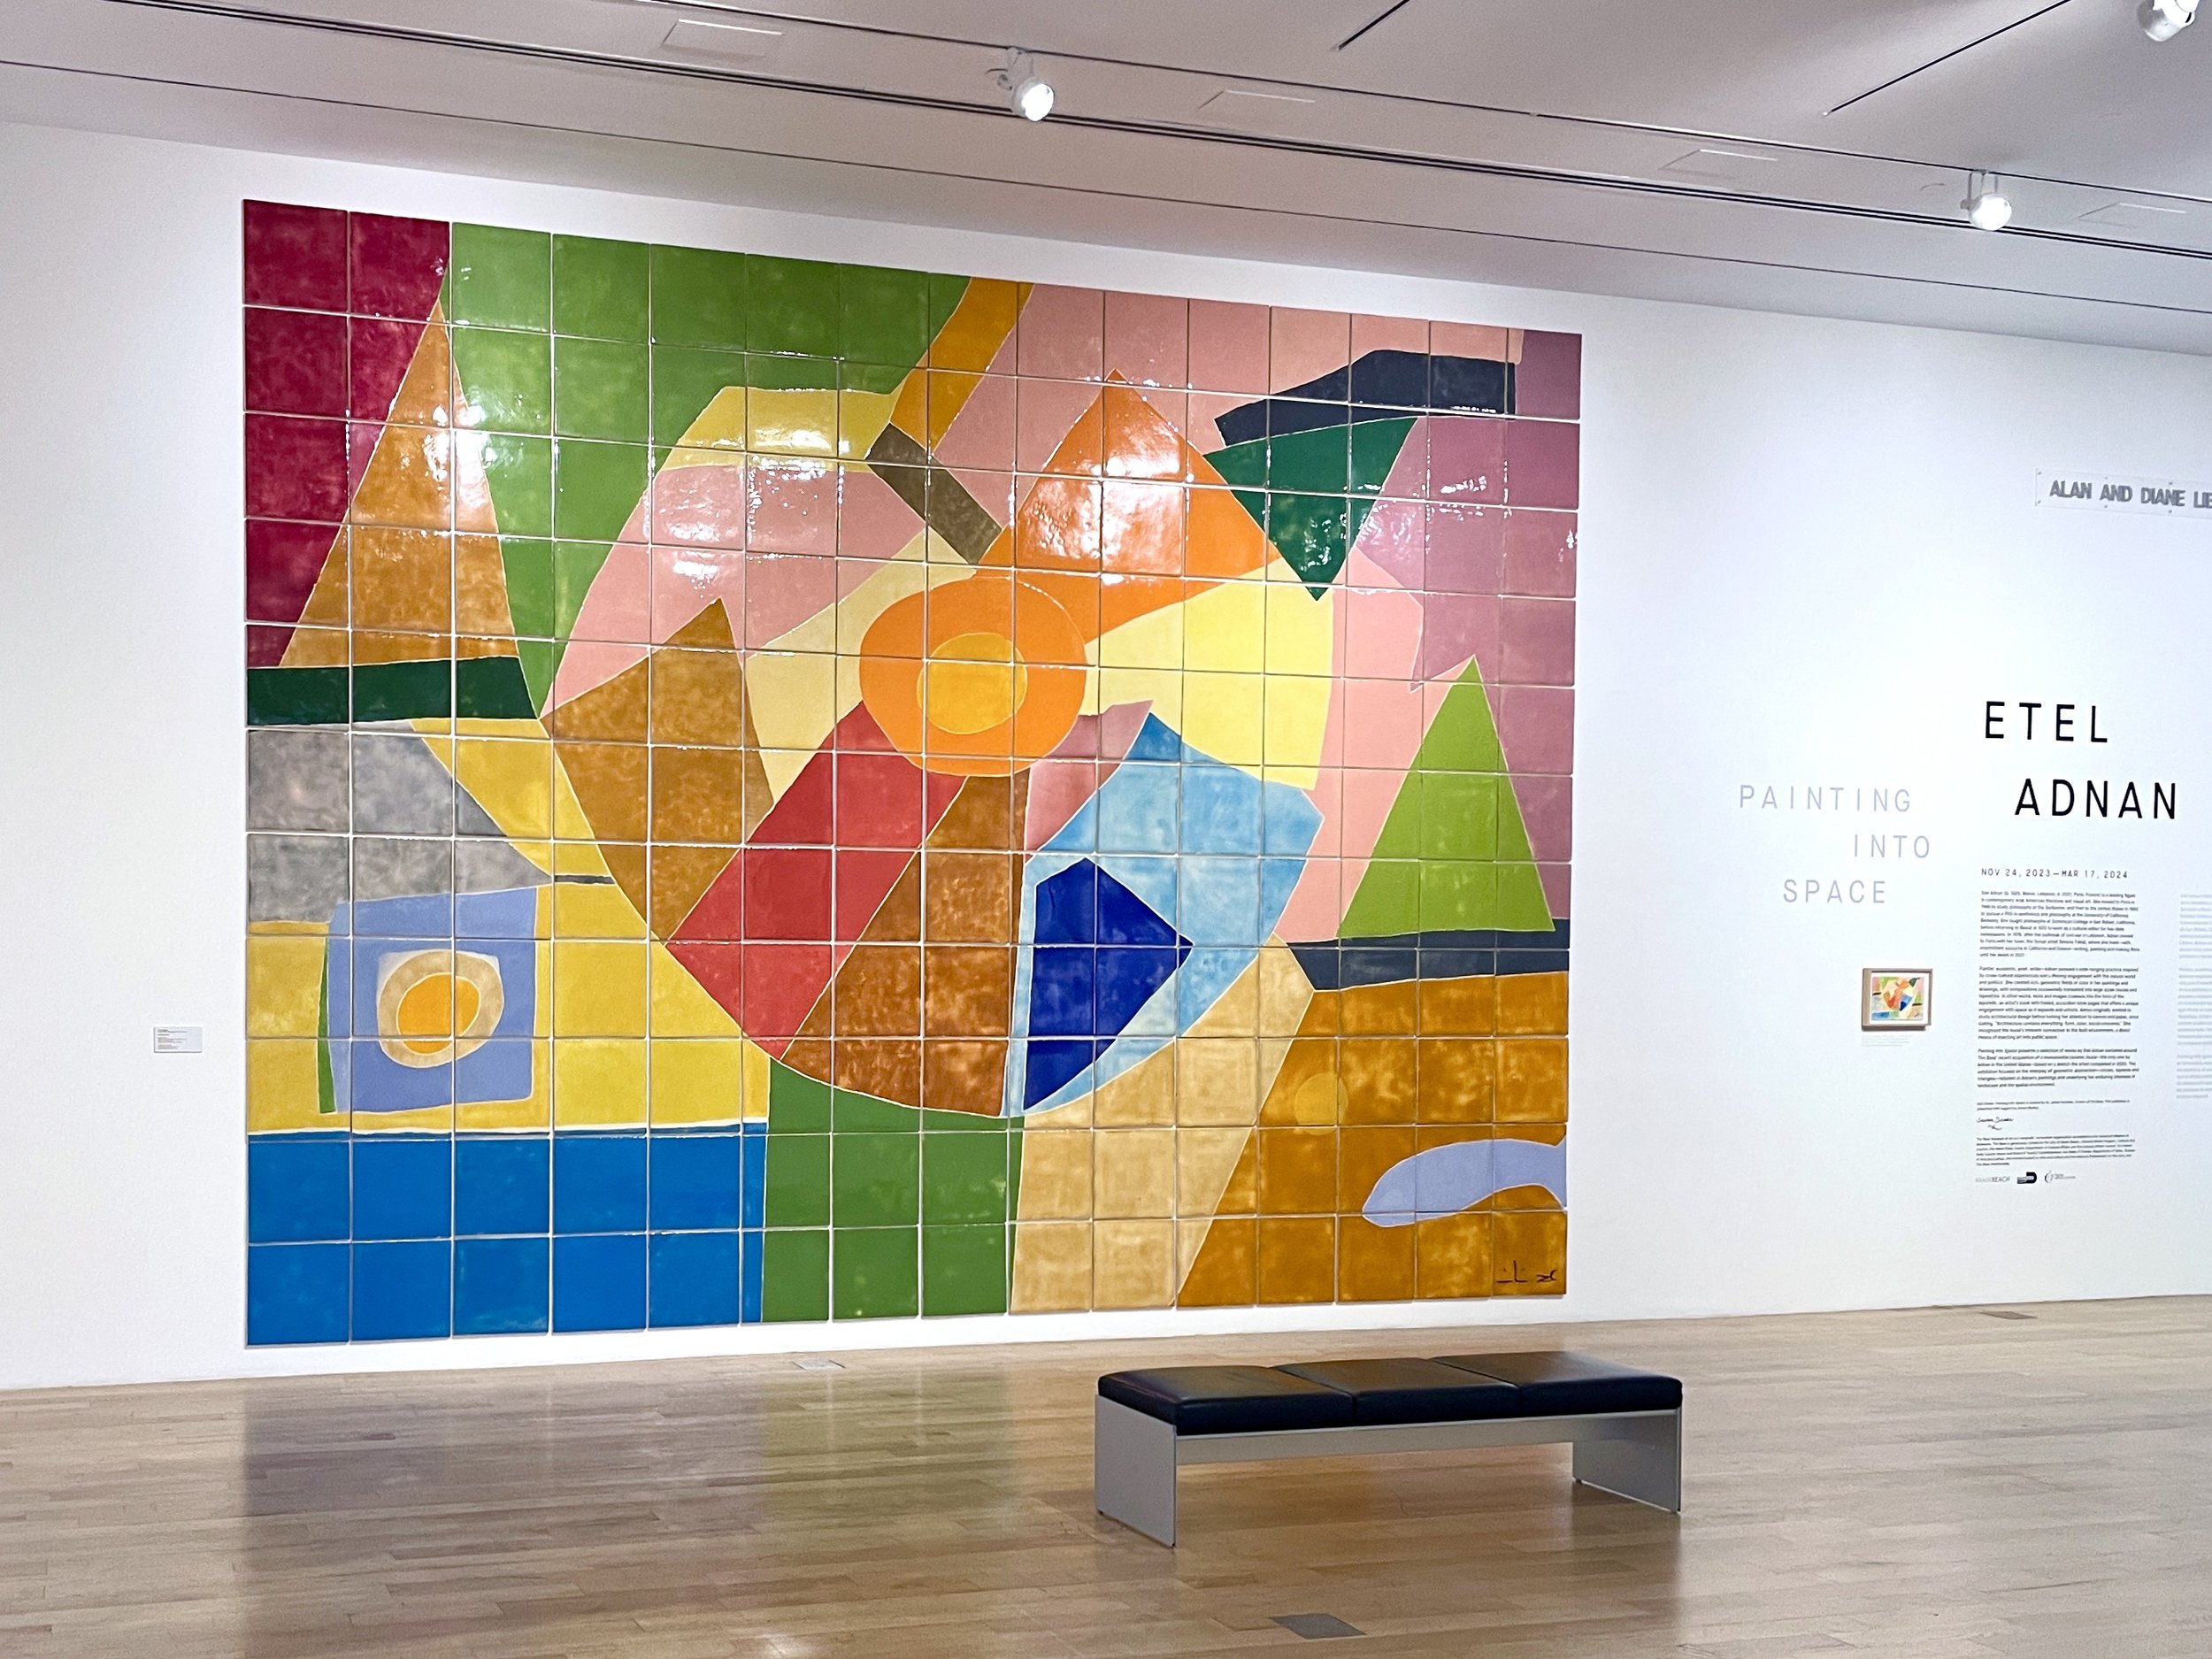   Untitled , 2023, Ceramic mural, 165 tiles, 16 × 16 in. each; 173 × 260 in. overall. Edition 1/3. Conceived in conjunction with artist’s sketch, 2020. Collection of The Bass, purchased through the John and Johanna Bass Acquisition Fund. 